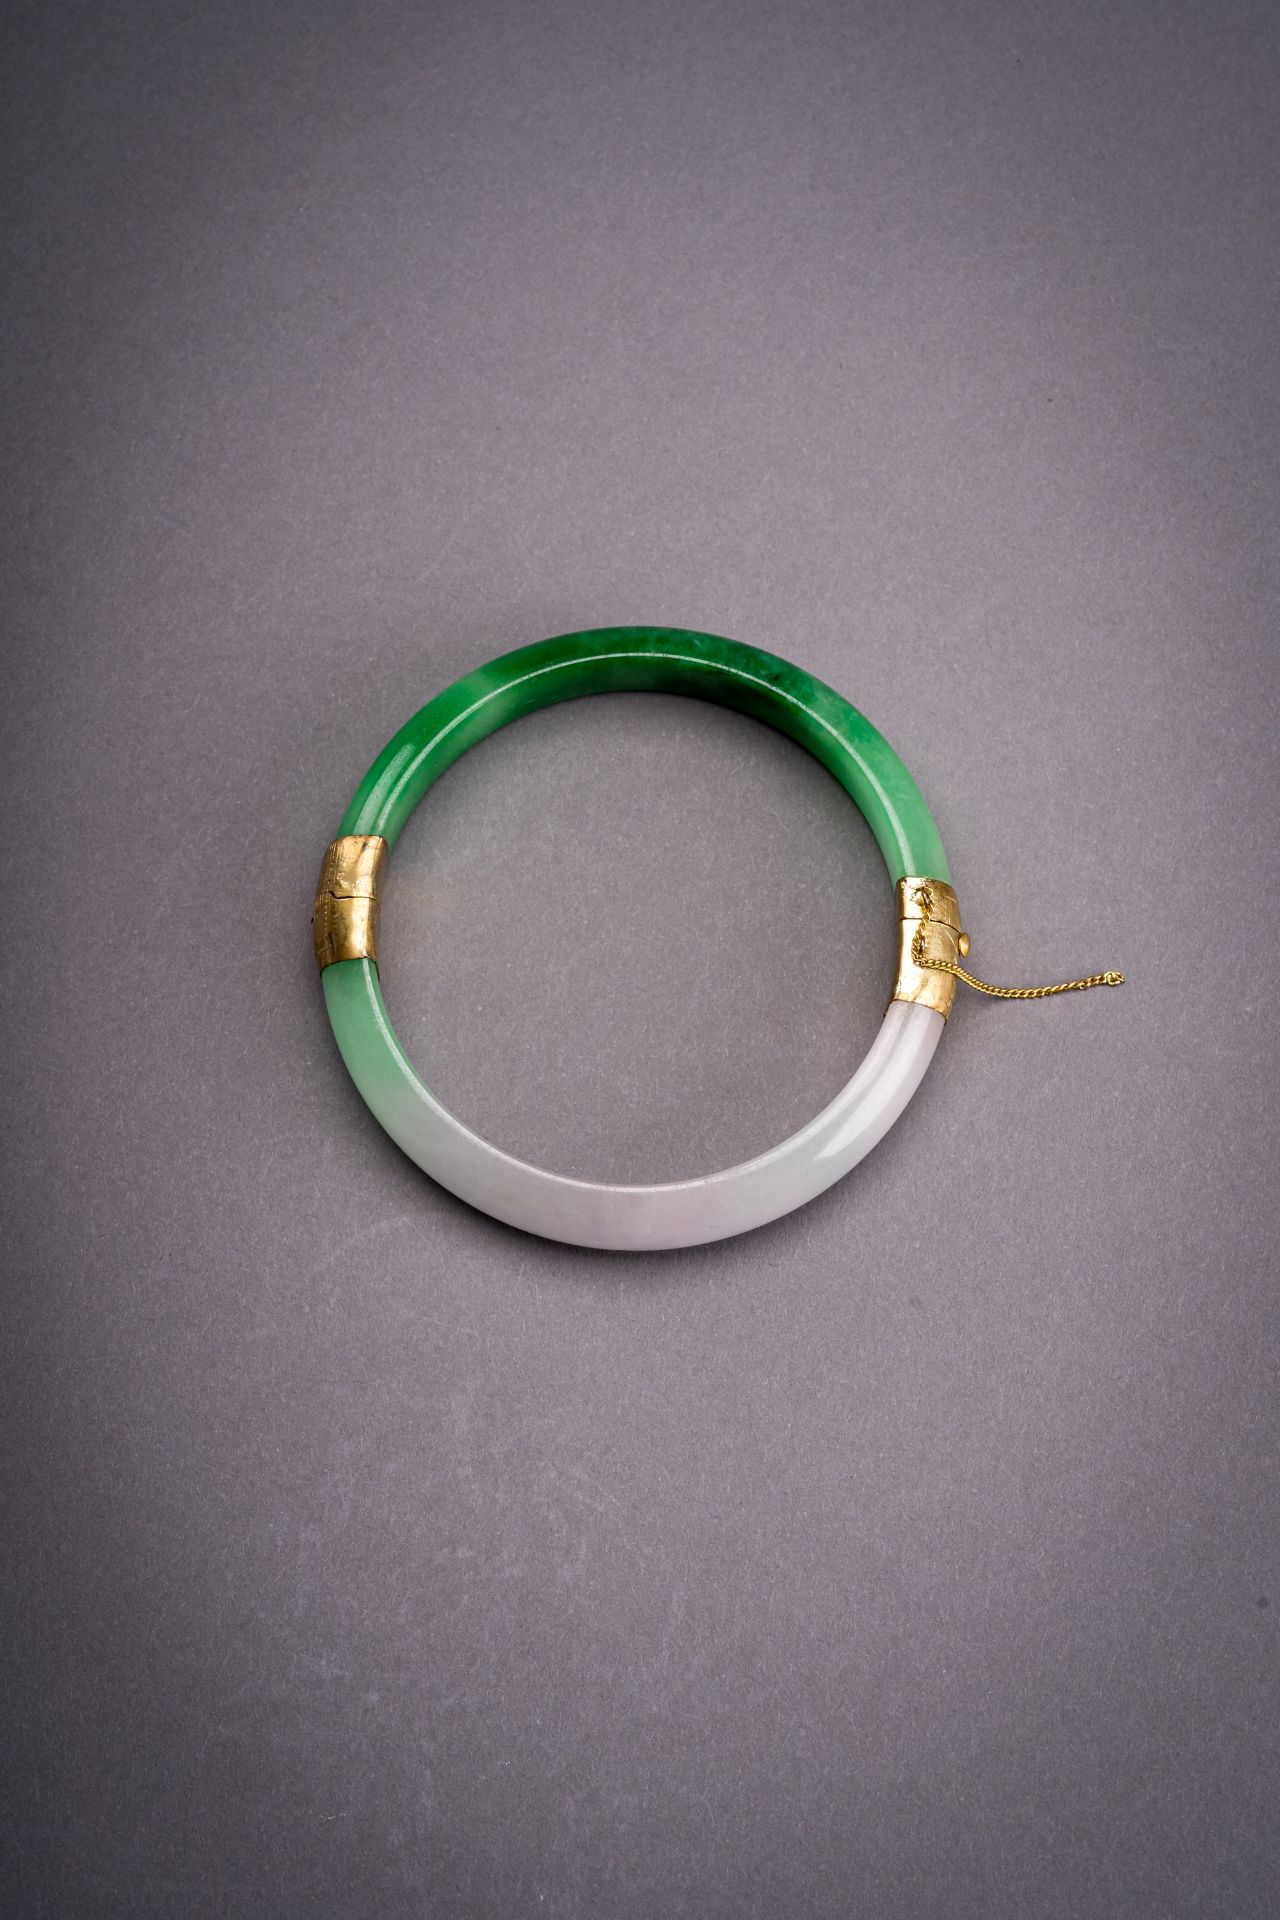 A PALE LAVENDER AND EMERALD GREEN JADEITE BANGLE - Image 5 of 7